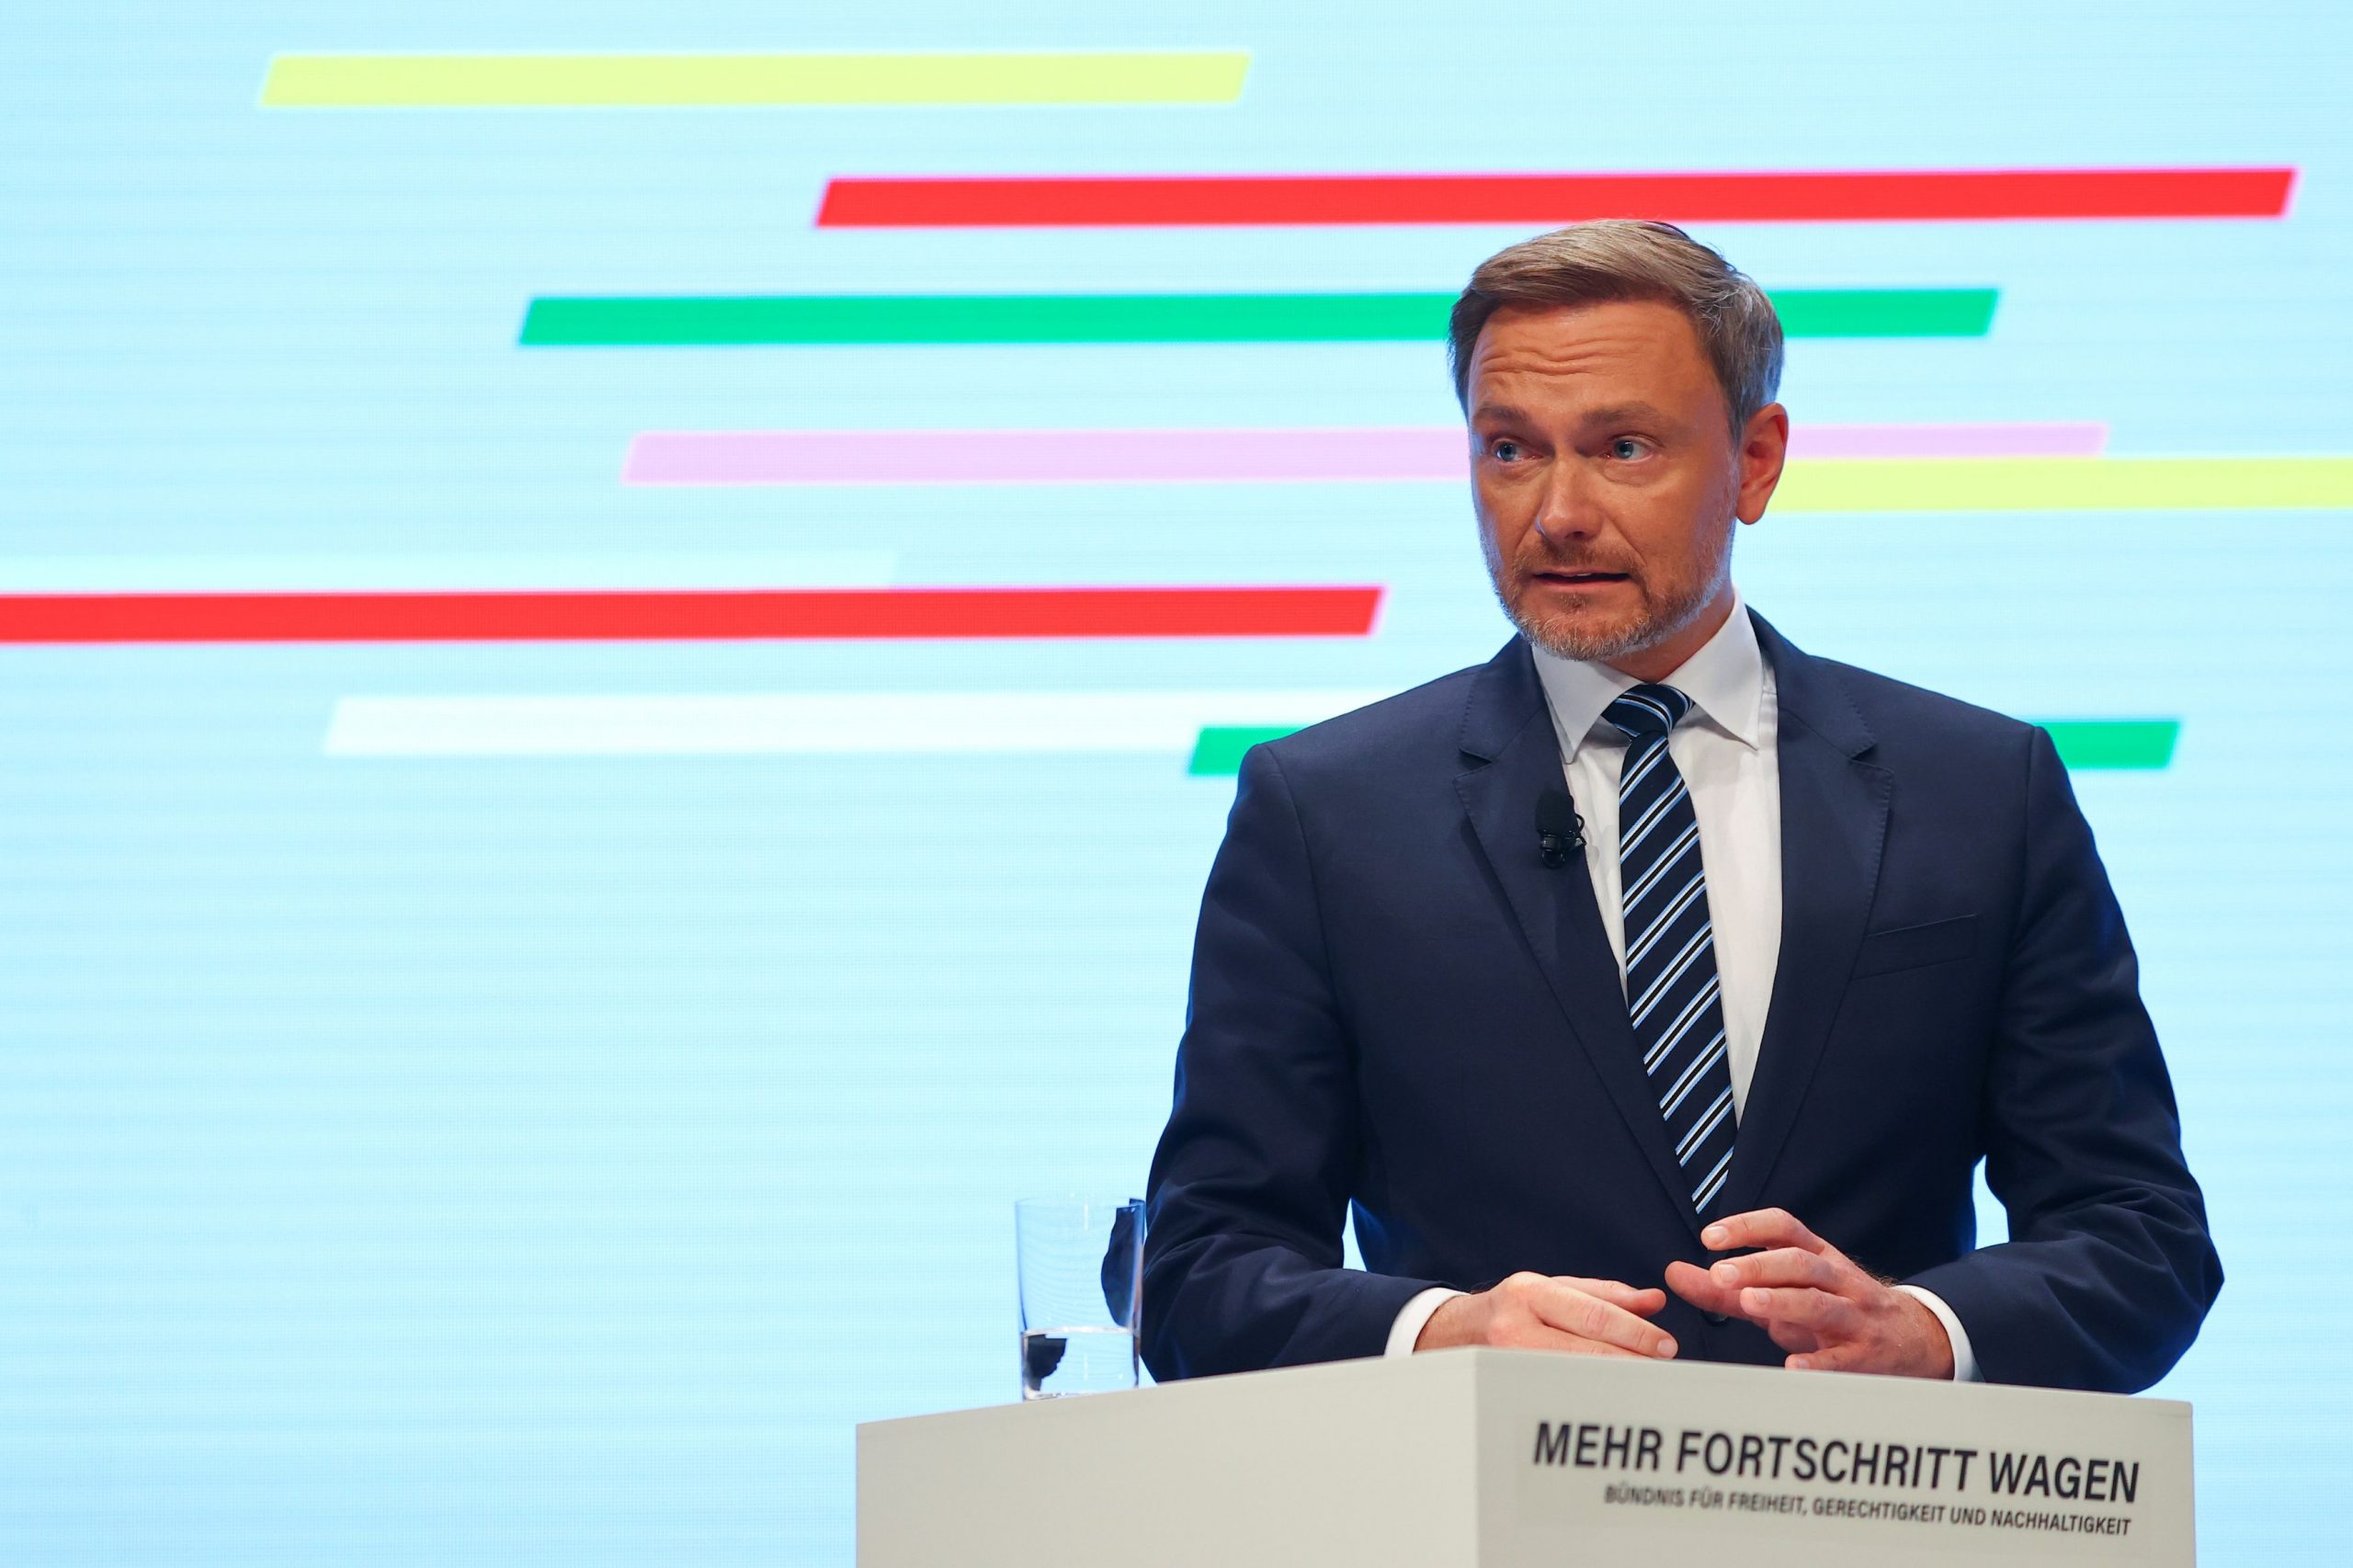 Greek diplomacy foresees a ‘watered down’ projection of FDP’s ideology in new German gov’t